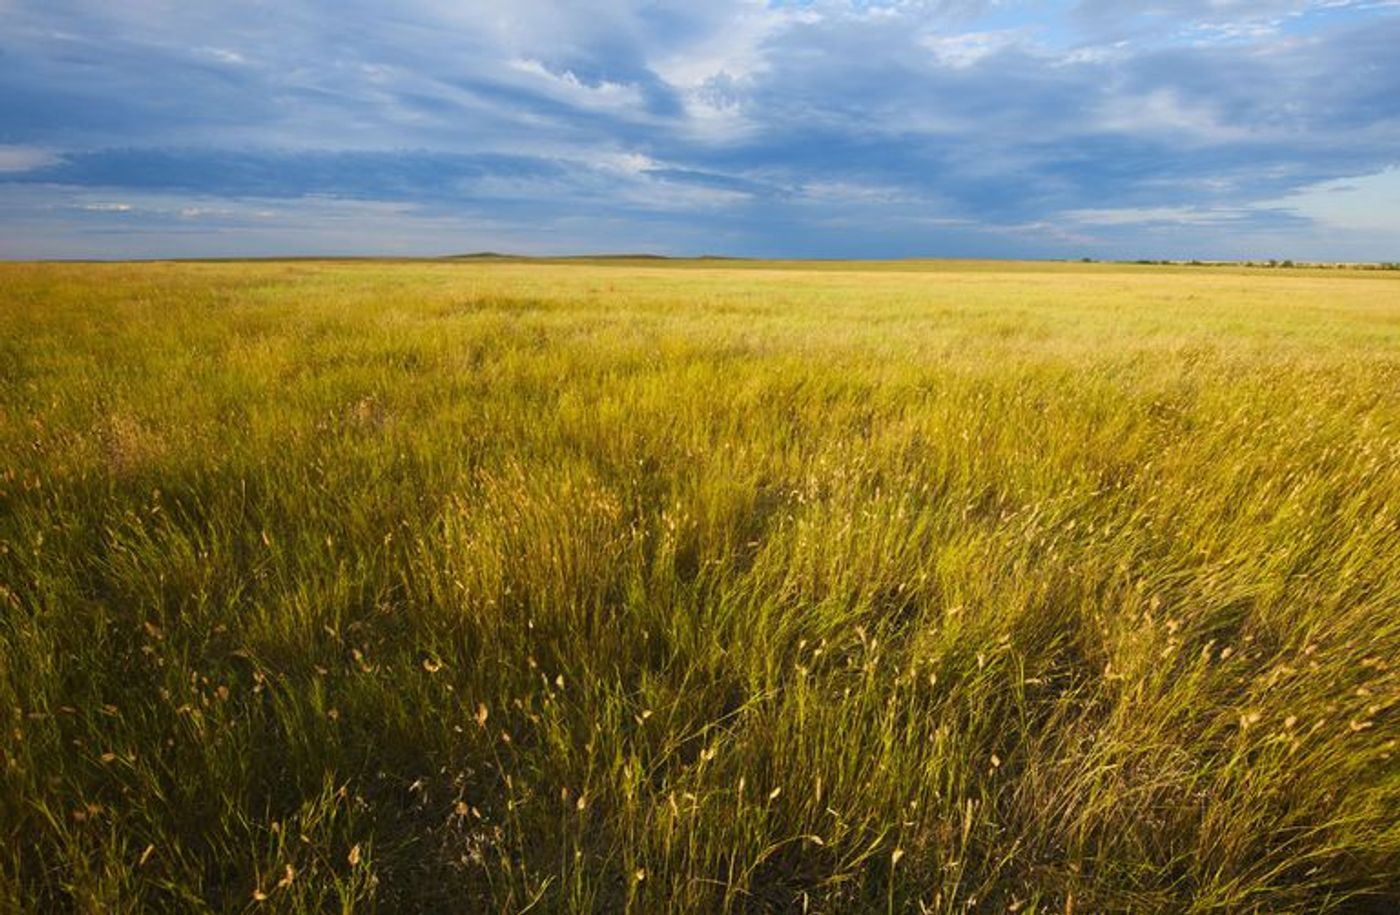 Grasslands come in many forms and are present on all continents, except Antarctica. Photo: ThoughtCo